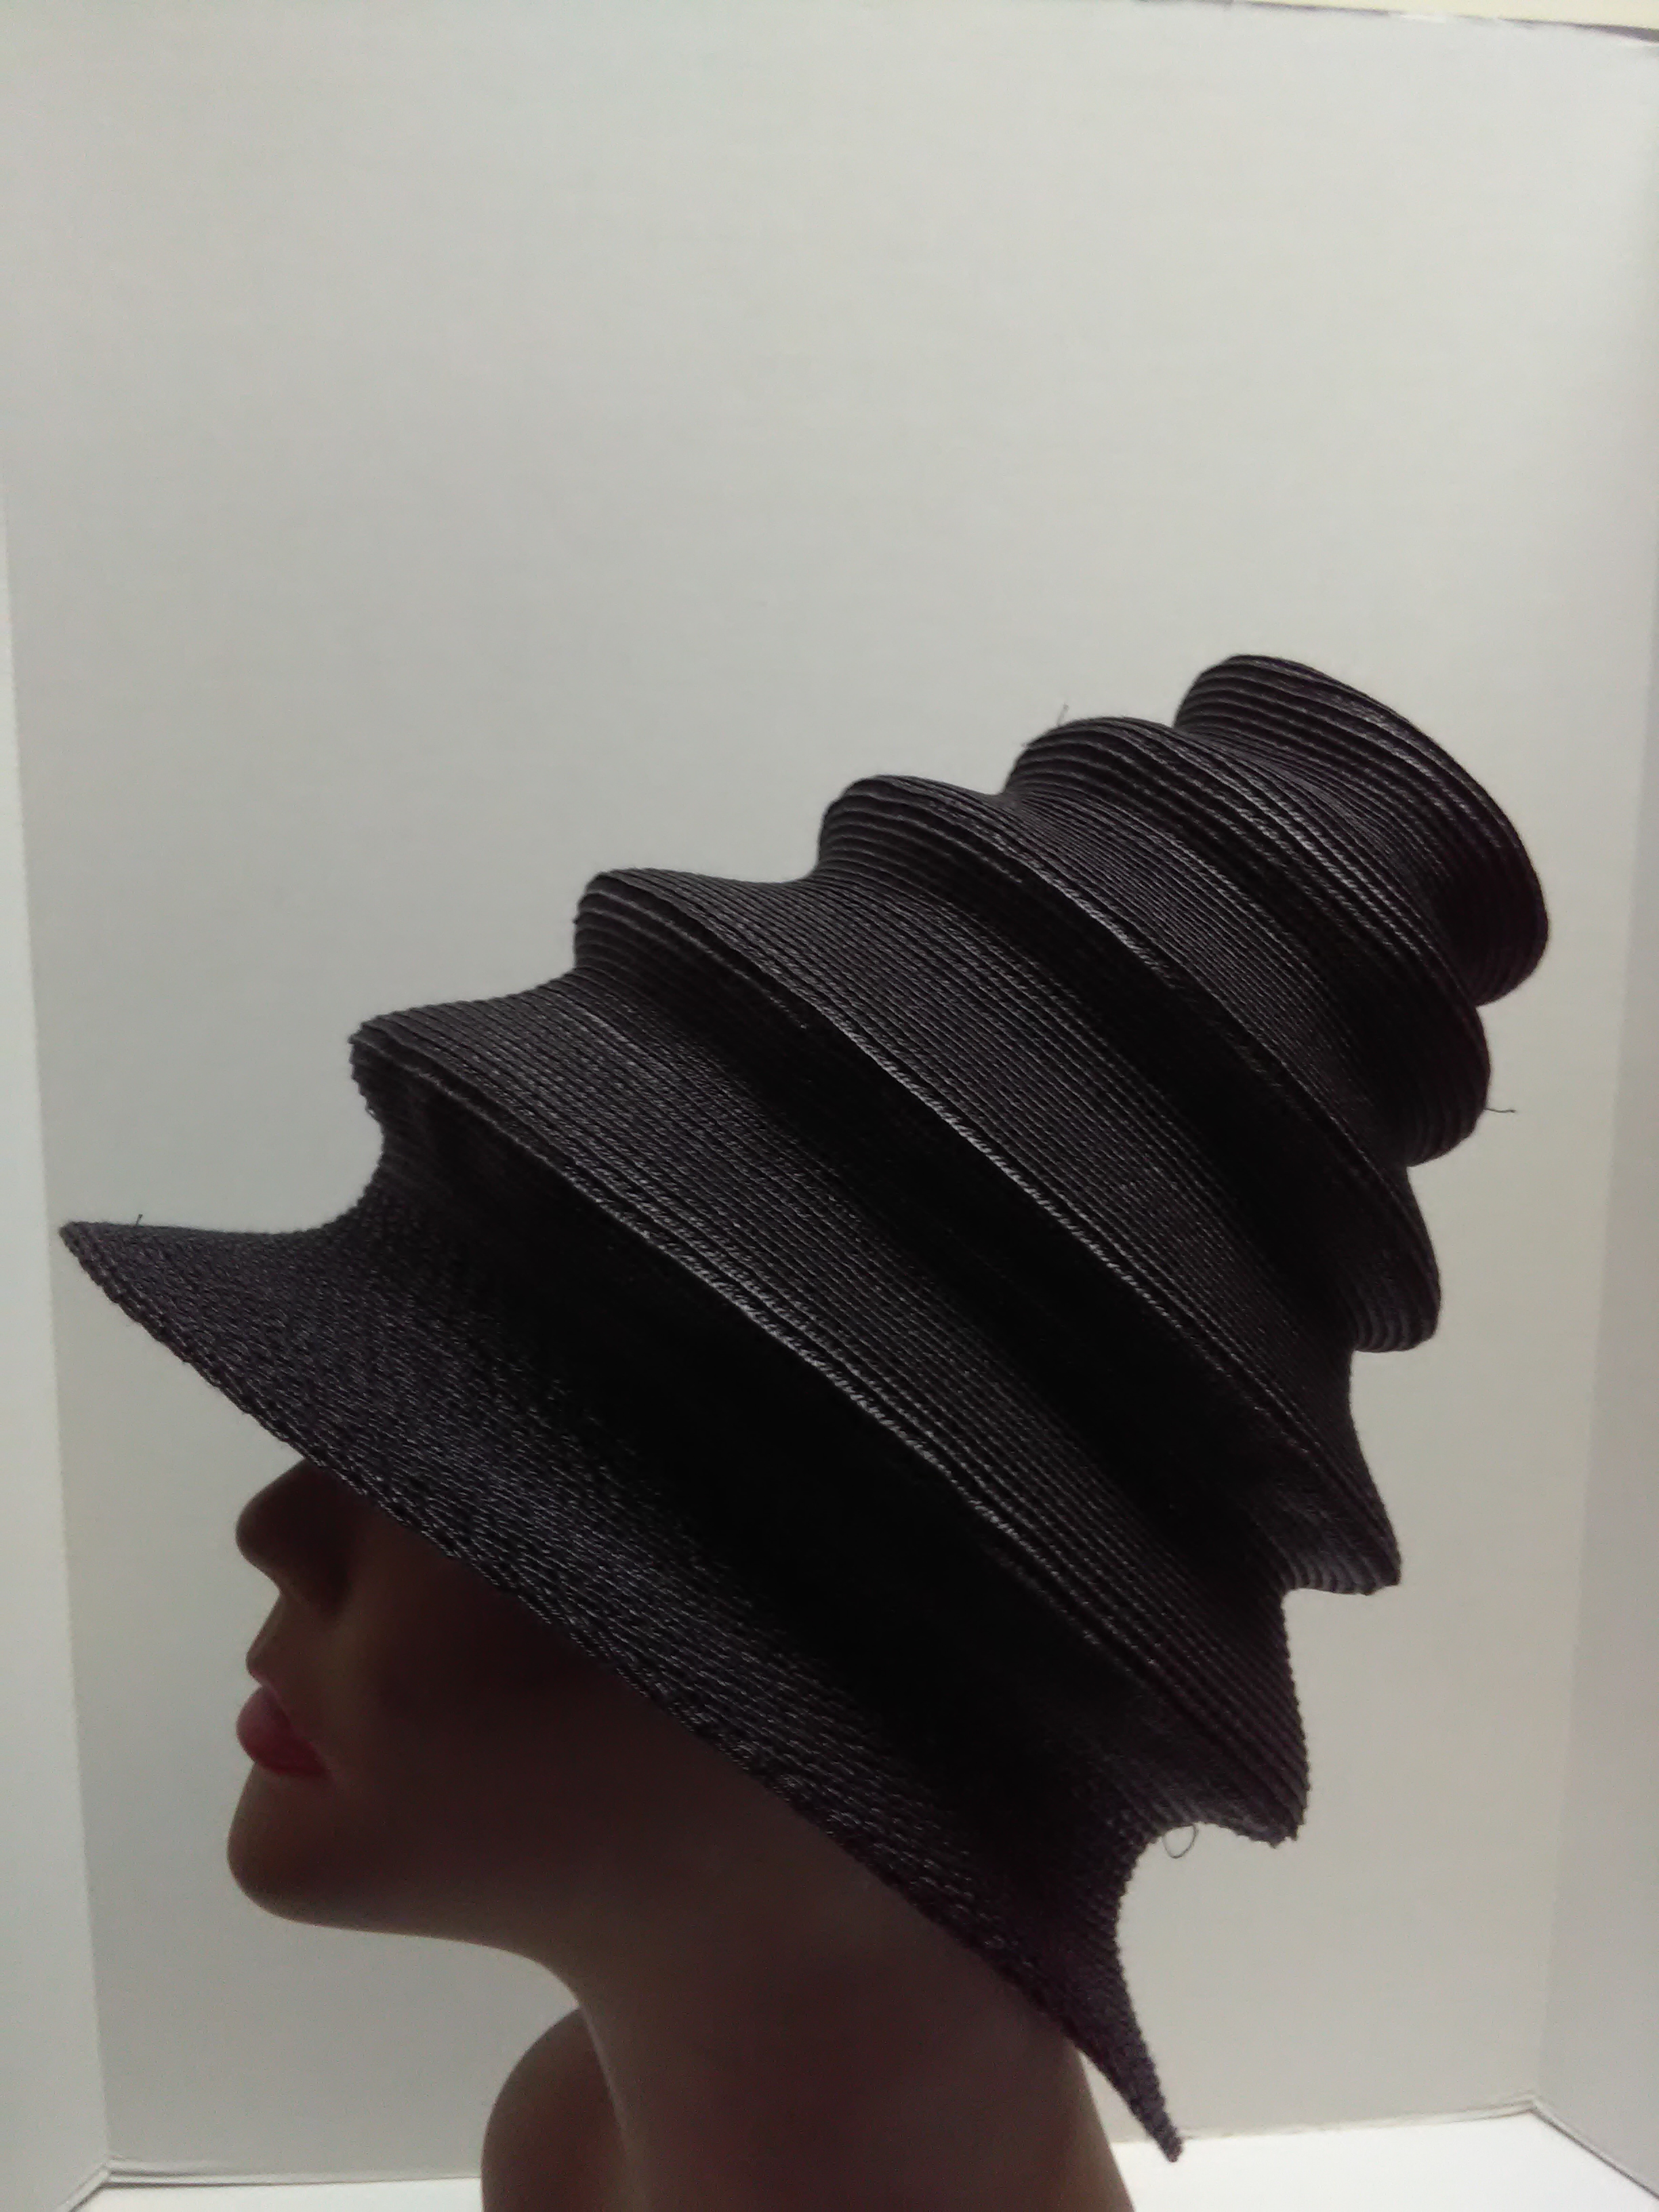 Women's Accordion Collapsible Black Hat with Short Brim